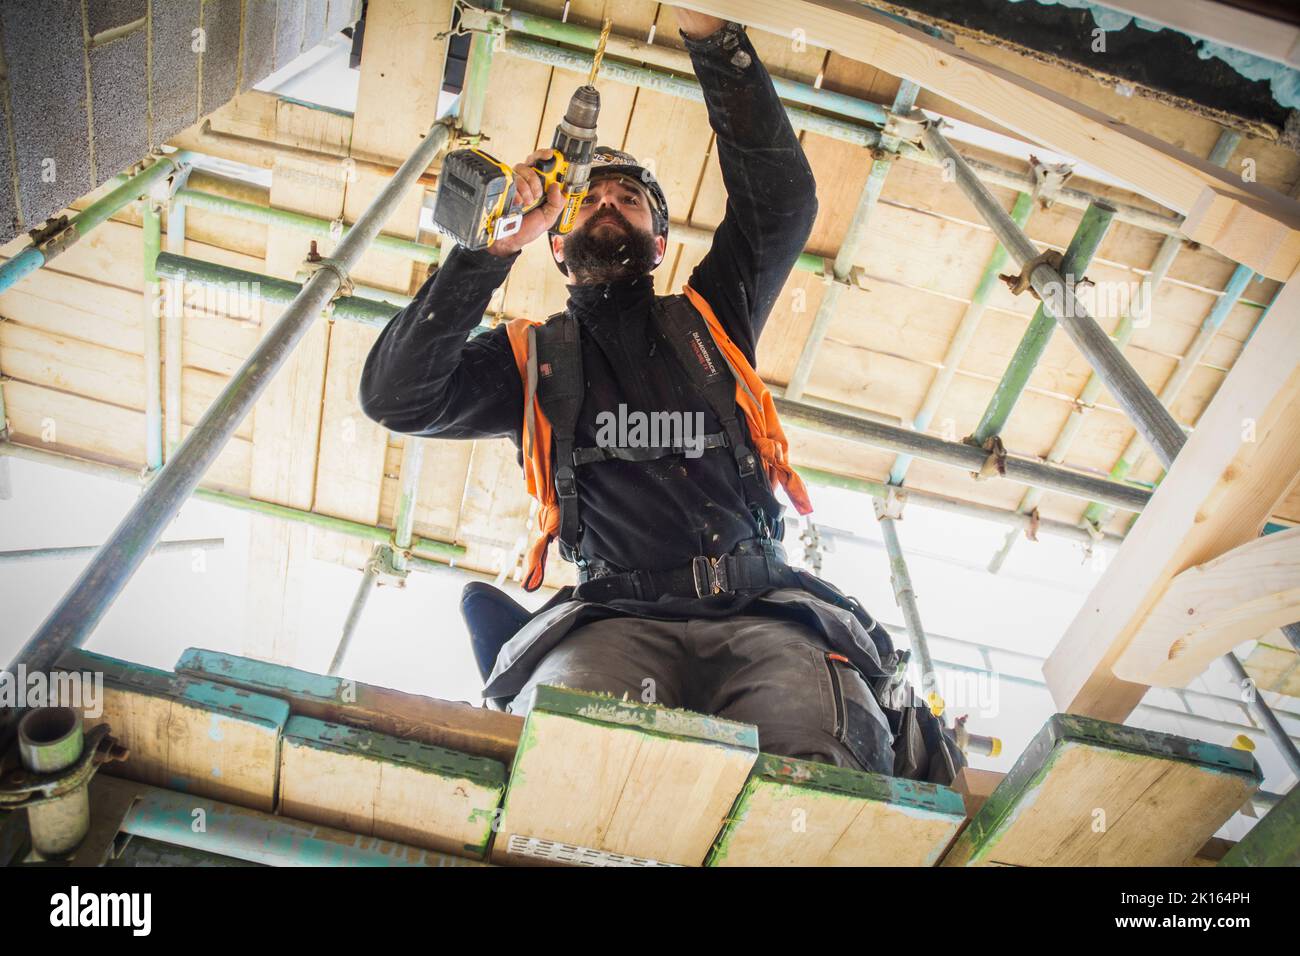 A carpenter / joiner working at a building site in Hampshire UK. Affordable housing UK. Stock Photo